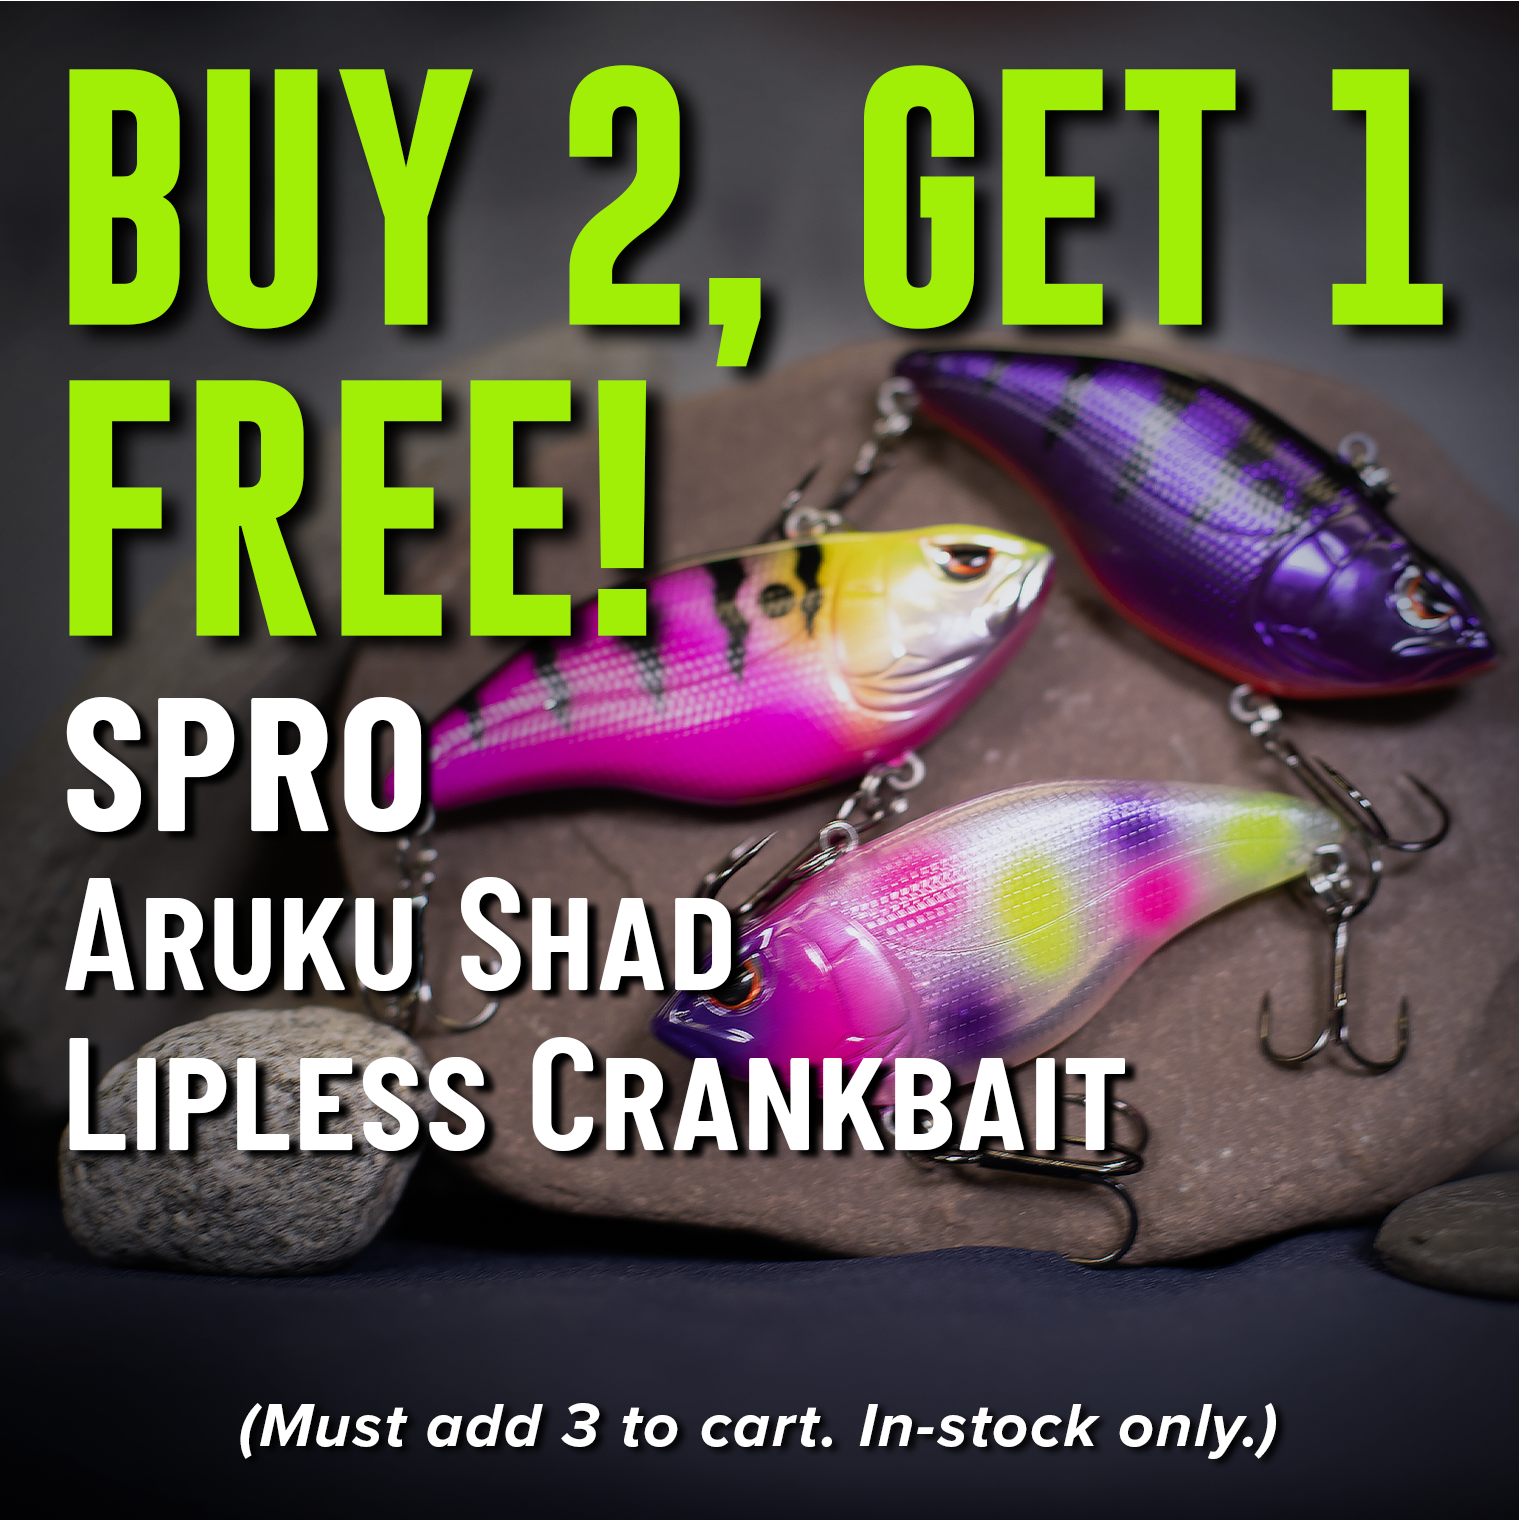 Buy 2, Get 1 Free! SPRO Aruku Shad Lipless Crankbait (Must add 3 to cart. In-stock only.)